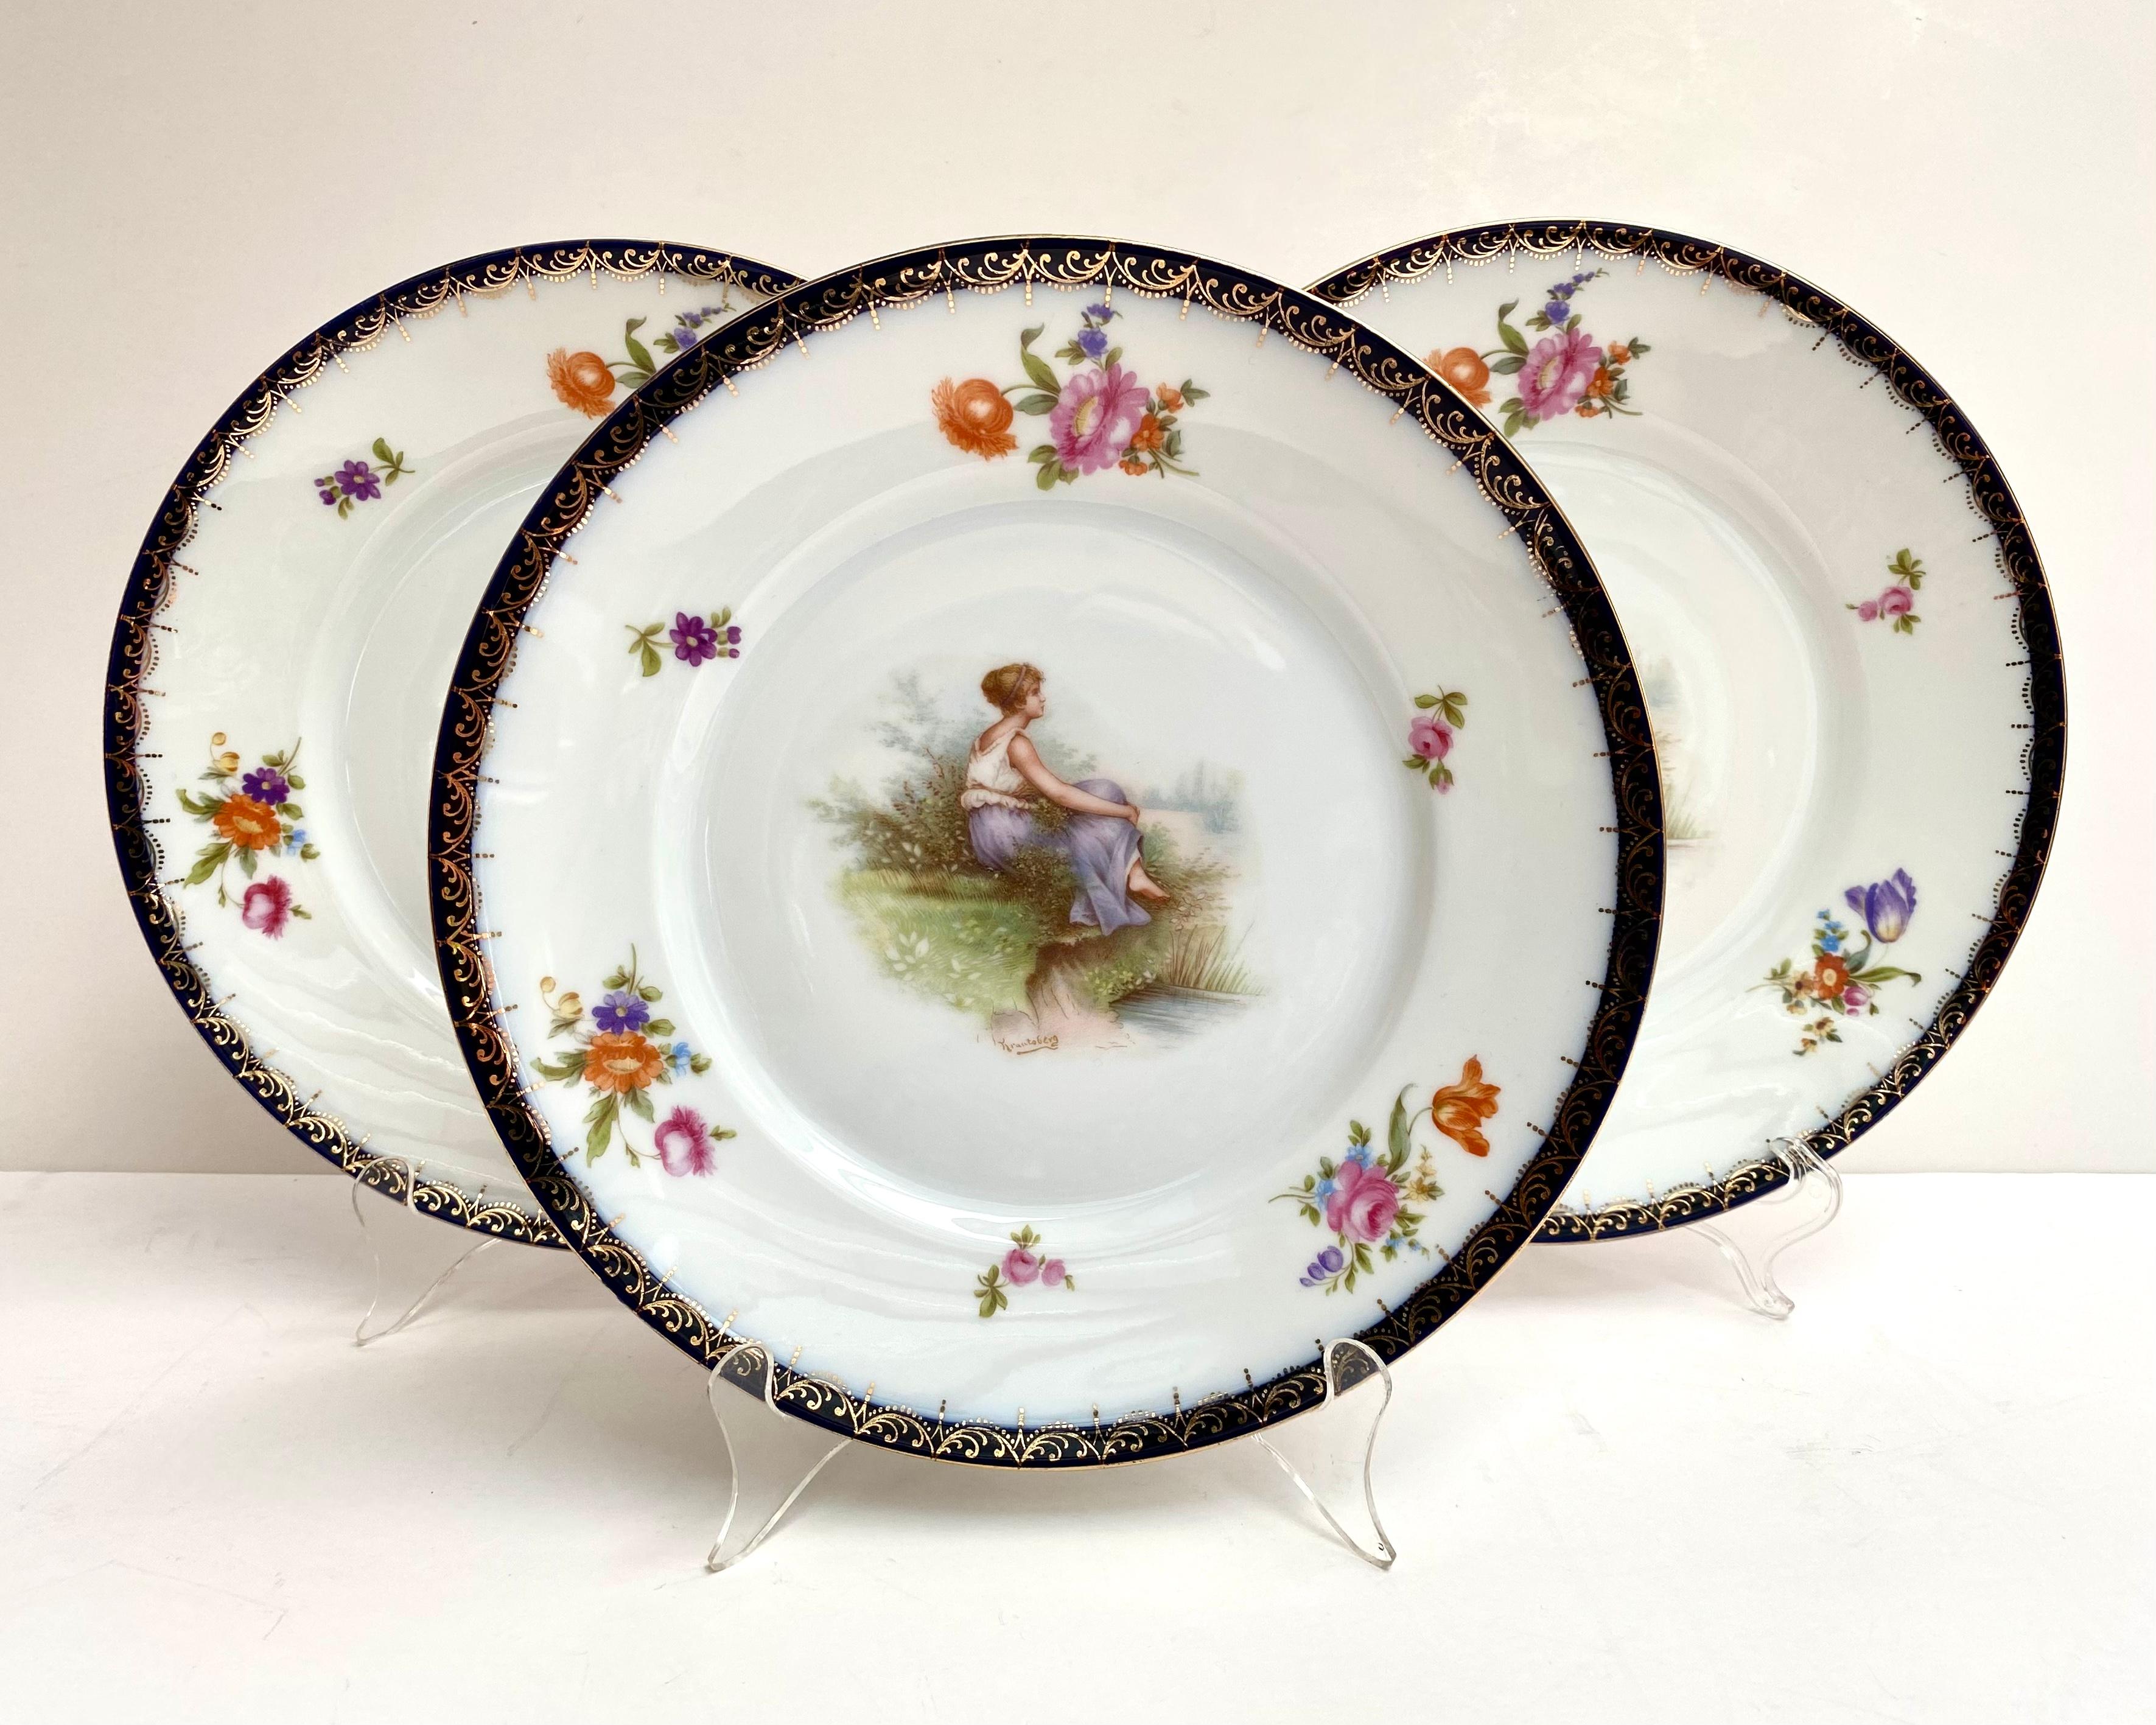 Золоч
Antique German Rosenthal Porcelain Set of 3 Dinner Plates, 1923, Floral Pattern.

Beautiful plates with red, blue, orange flowers. Depicting a girl sitting on the grass. 

Very colourful.

STAMPED ON THE BACK ROSENTHAL SELB BAVARIA

The set